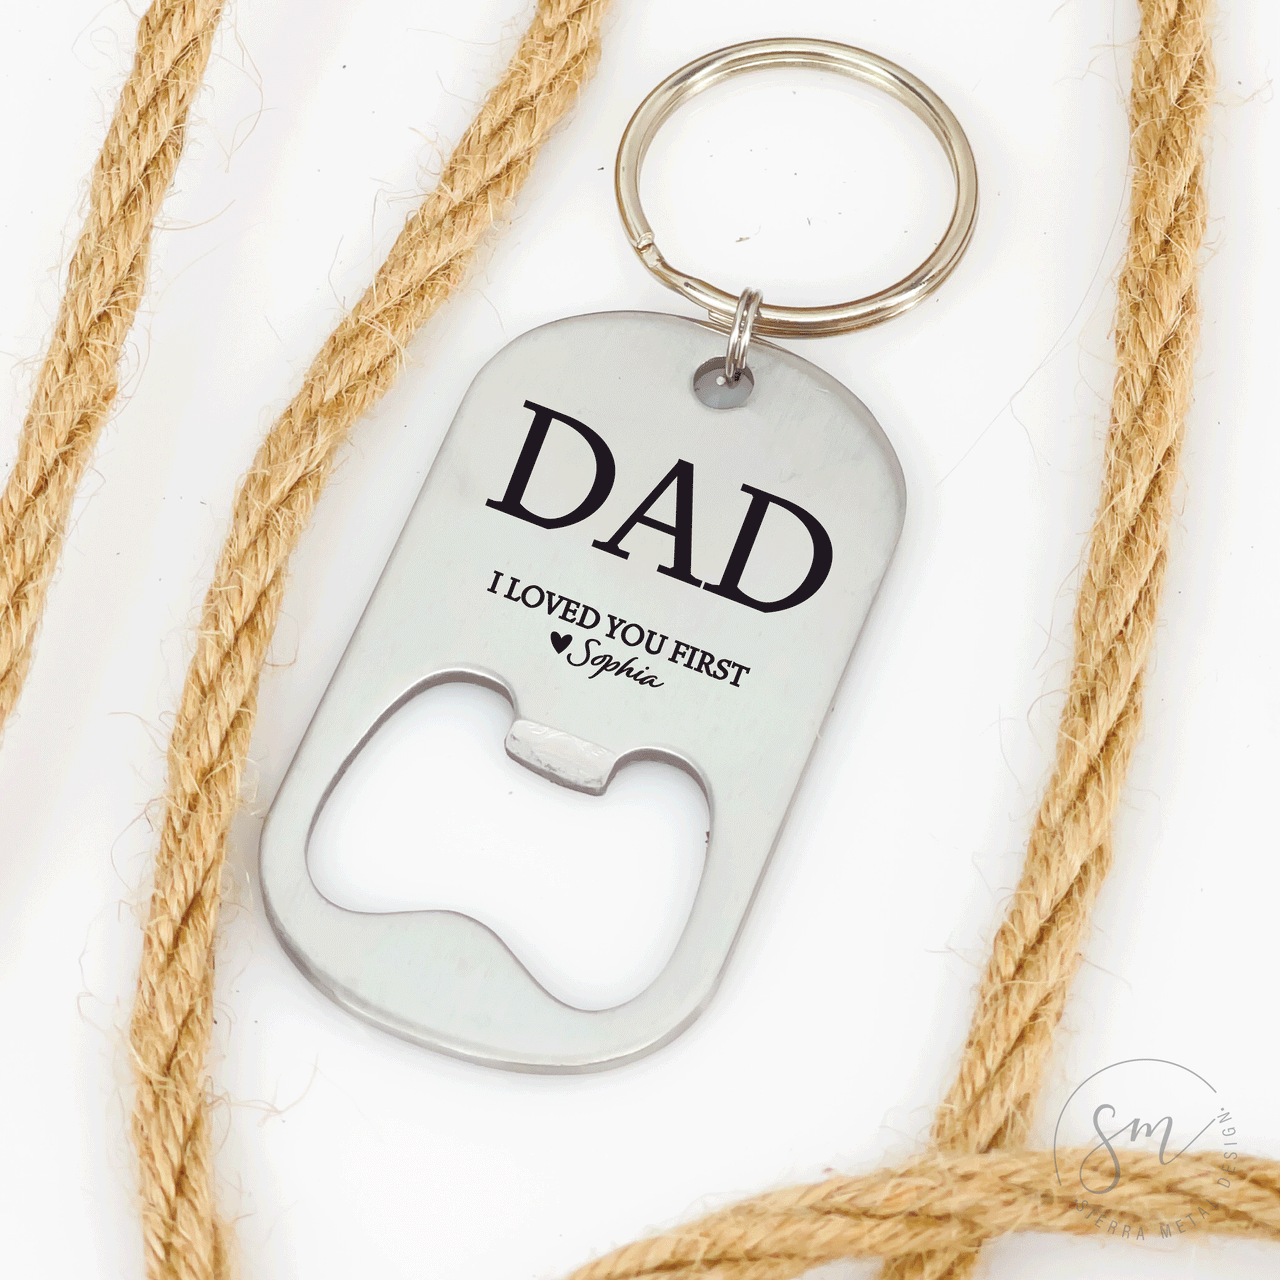 I Loved You First Bottle Opener Keychain